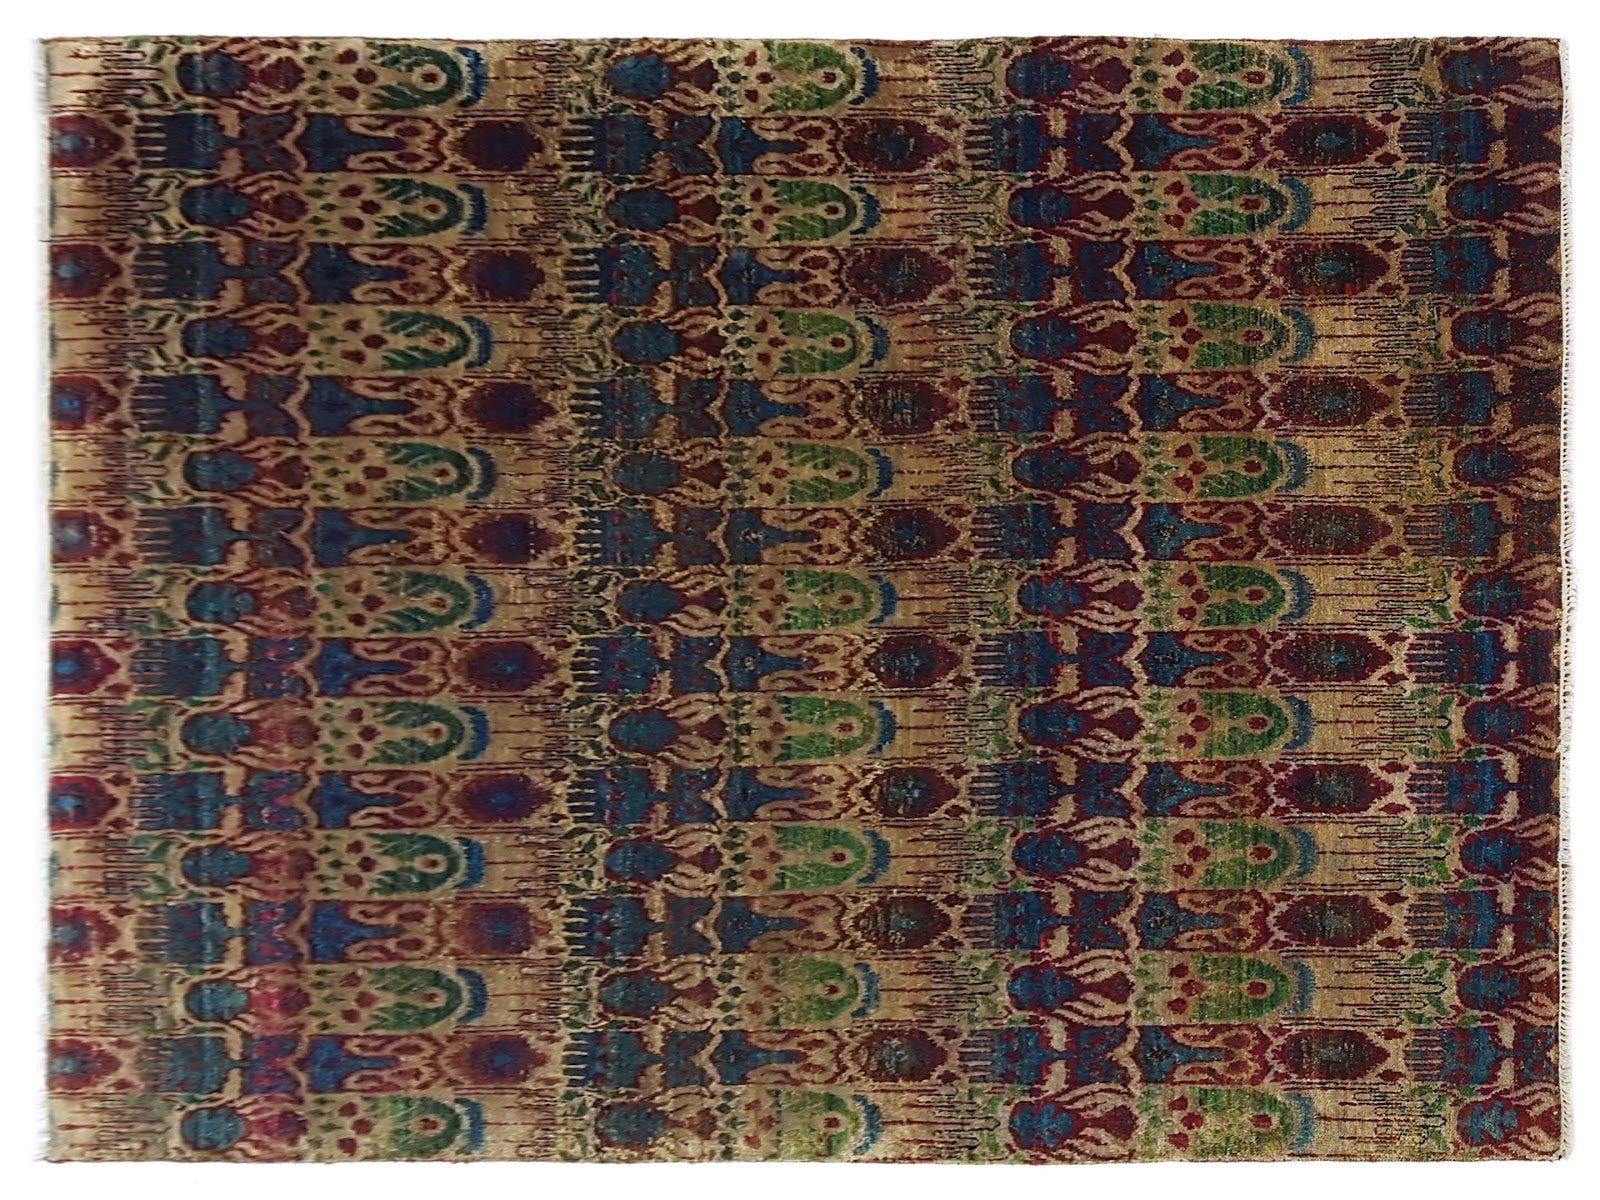 8x10 transitional rug with a captivating peacock design in multi-colors, crafted from a blend of silk and wool, hand-knotted in Pakistan